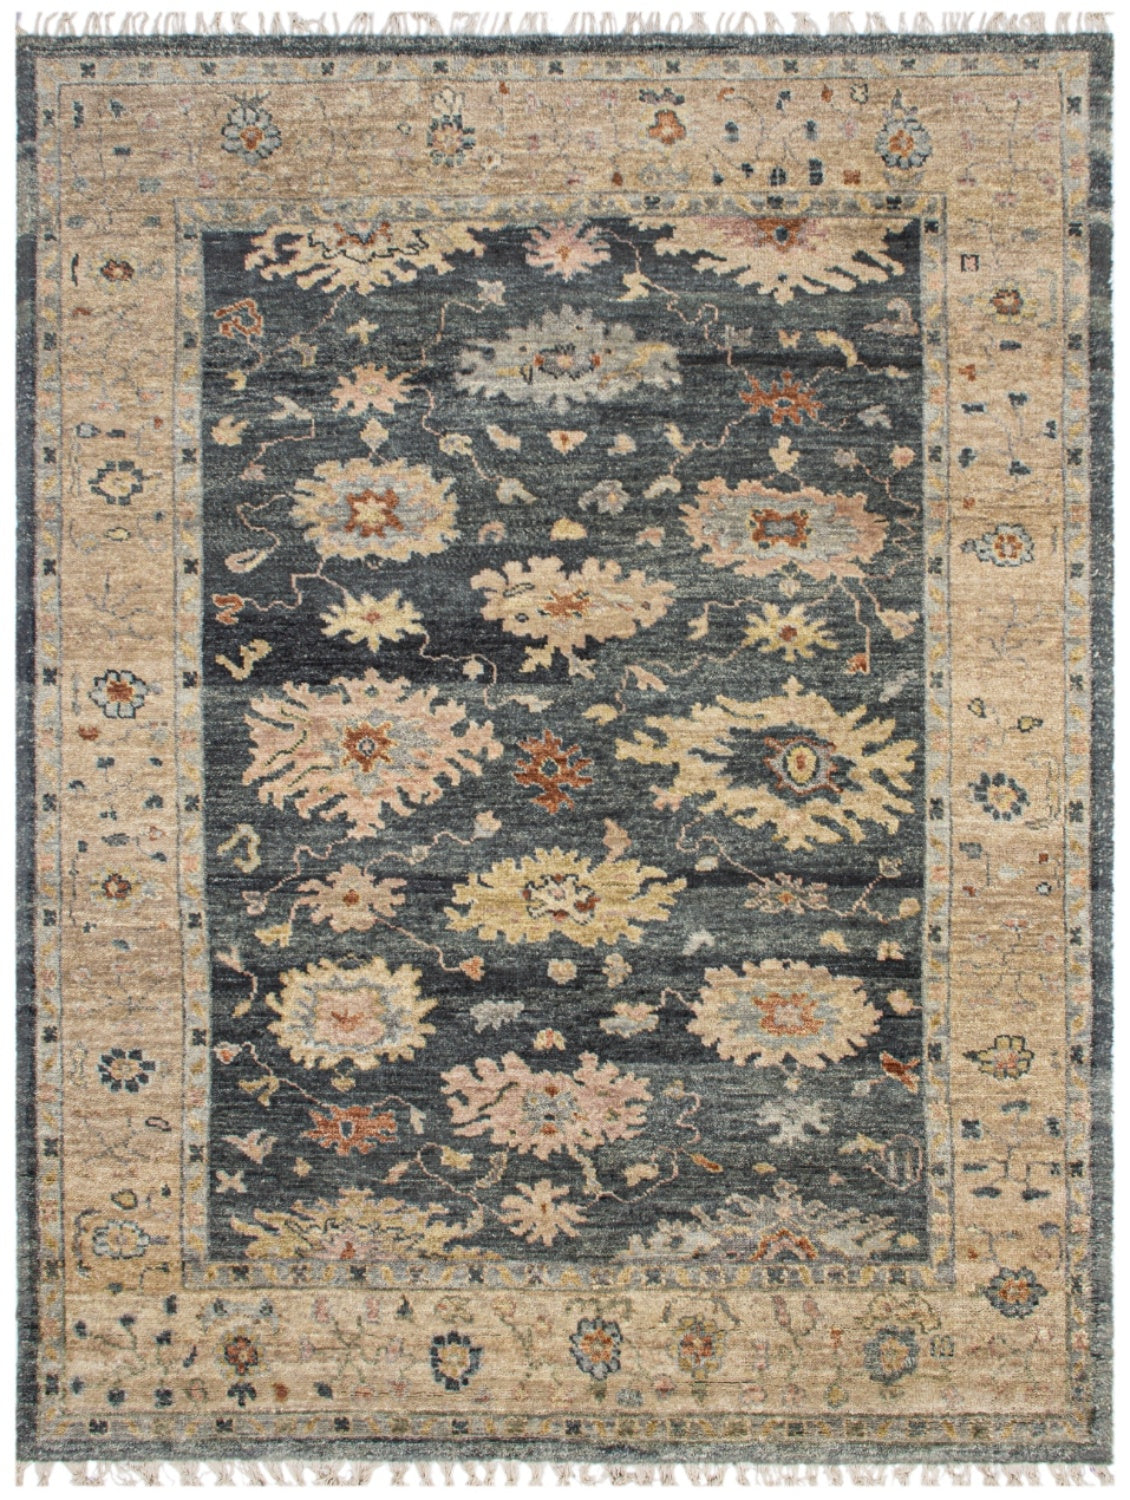 Sultanabad 1 Handwoven Traditional Rug